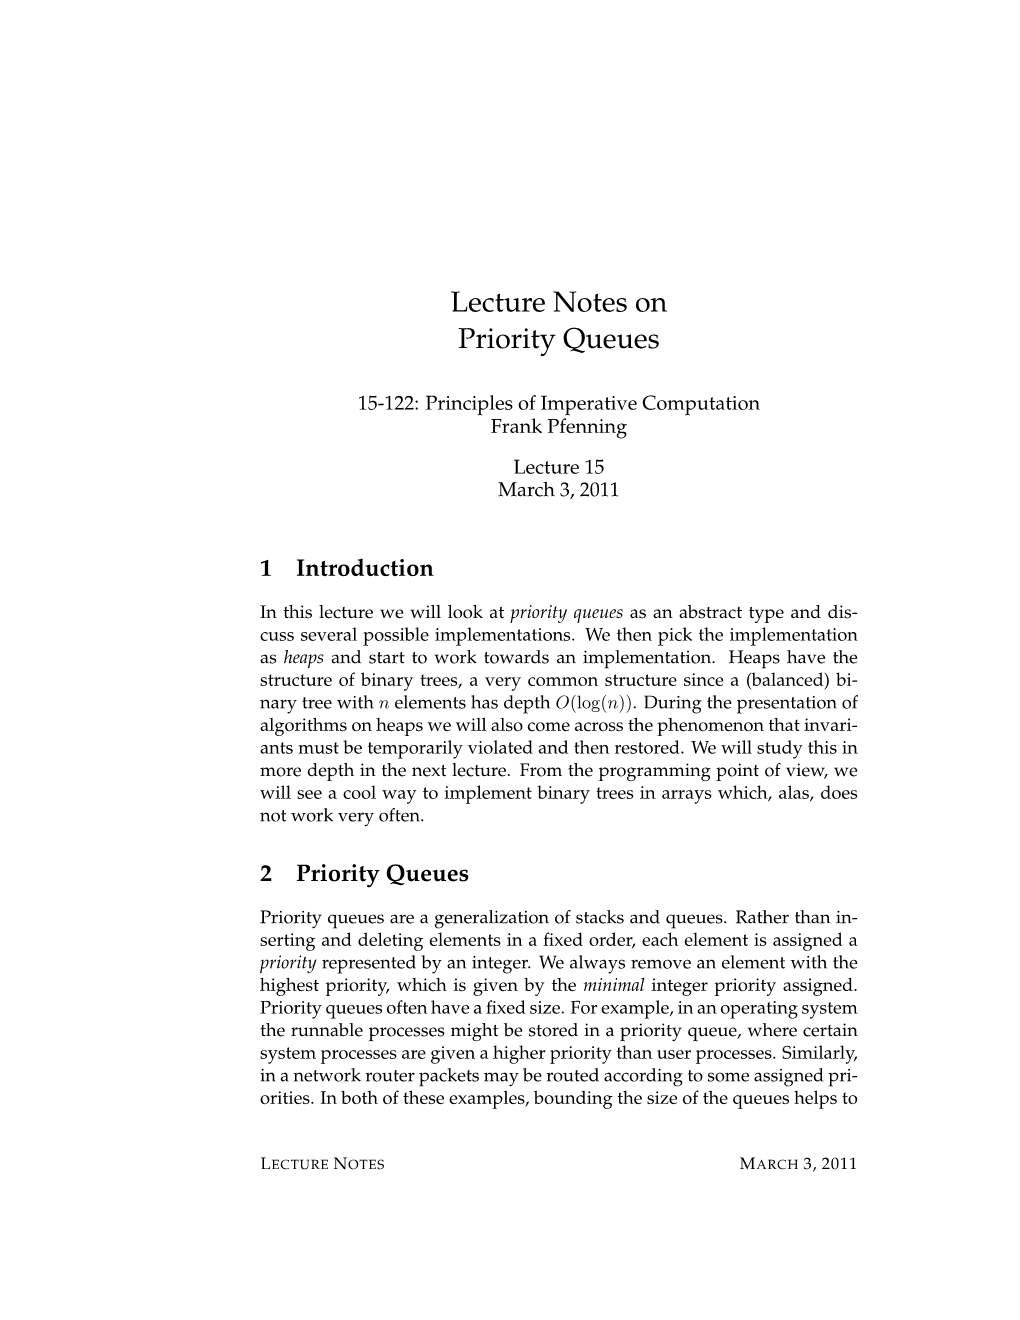 Lecture Notes on Priority Queues